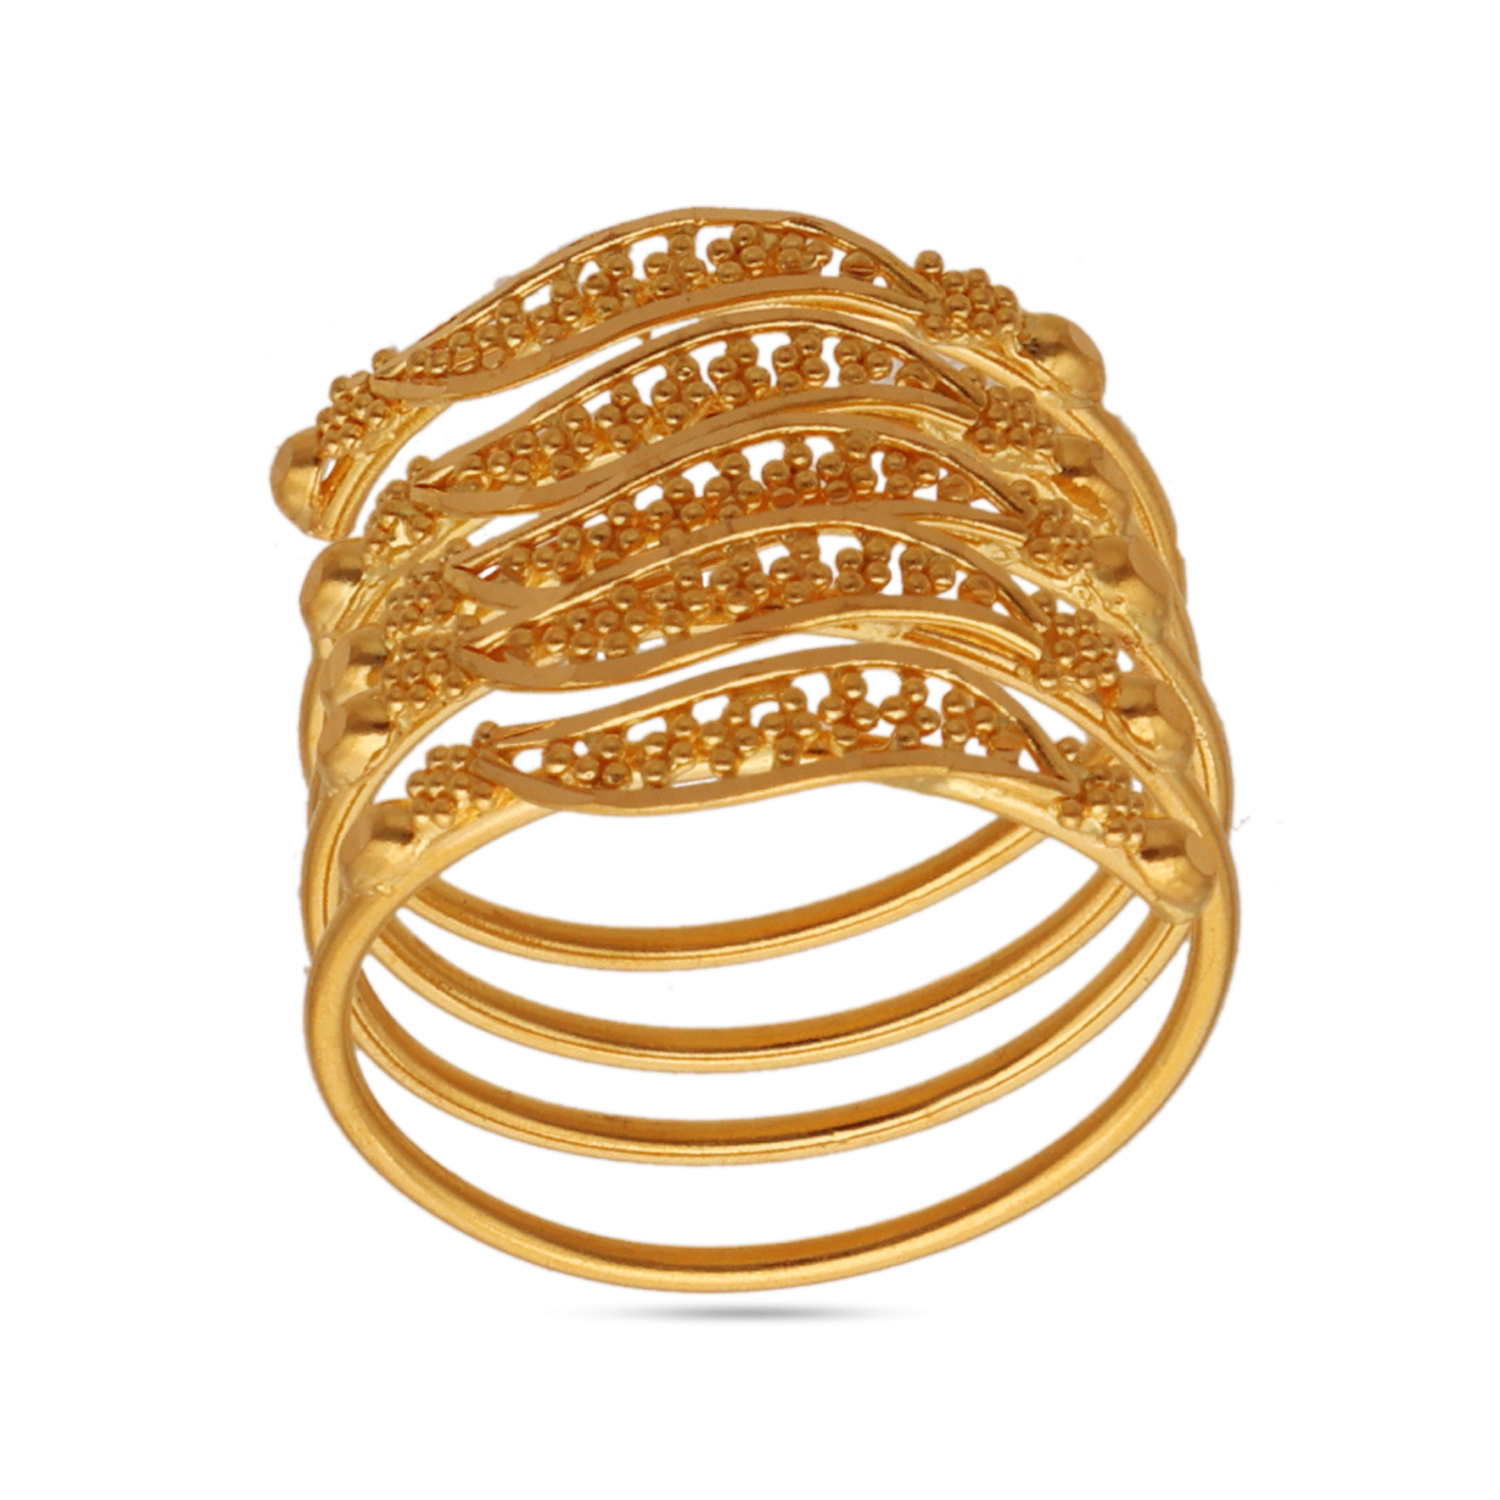 deep aabi jewels bis hallmark gold ring for the woman